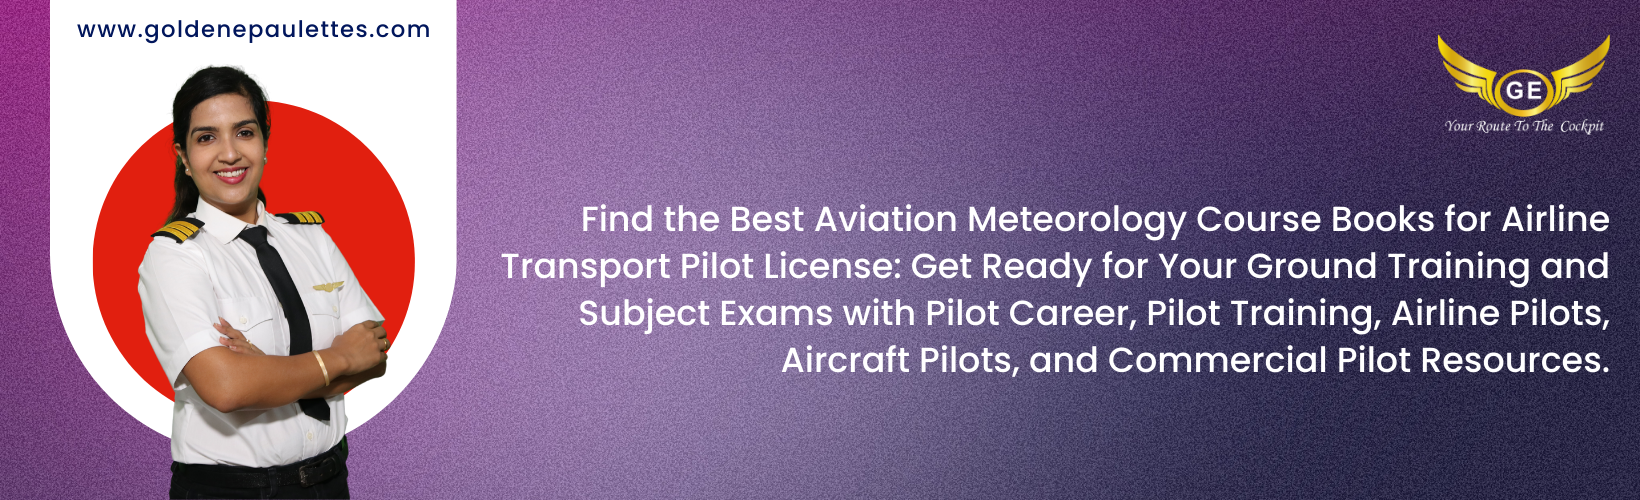 Tips and Tricks to Ace the Aviation Meteorology Course in Airline Transport Pilot License